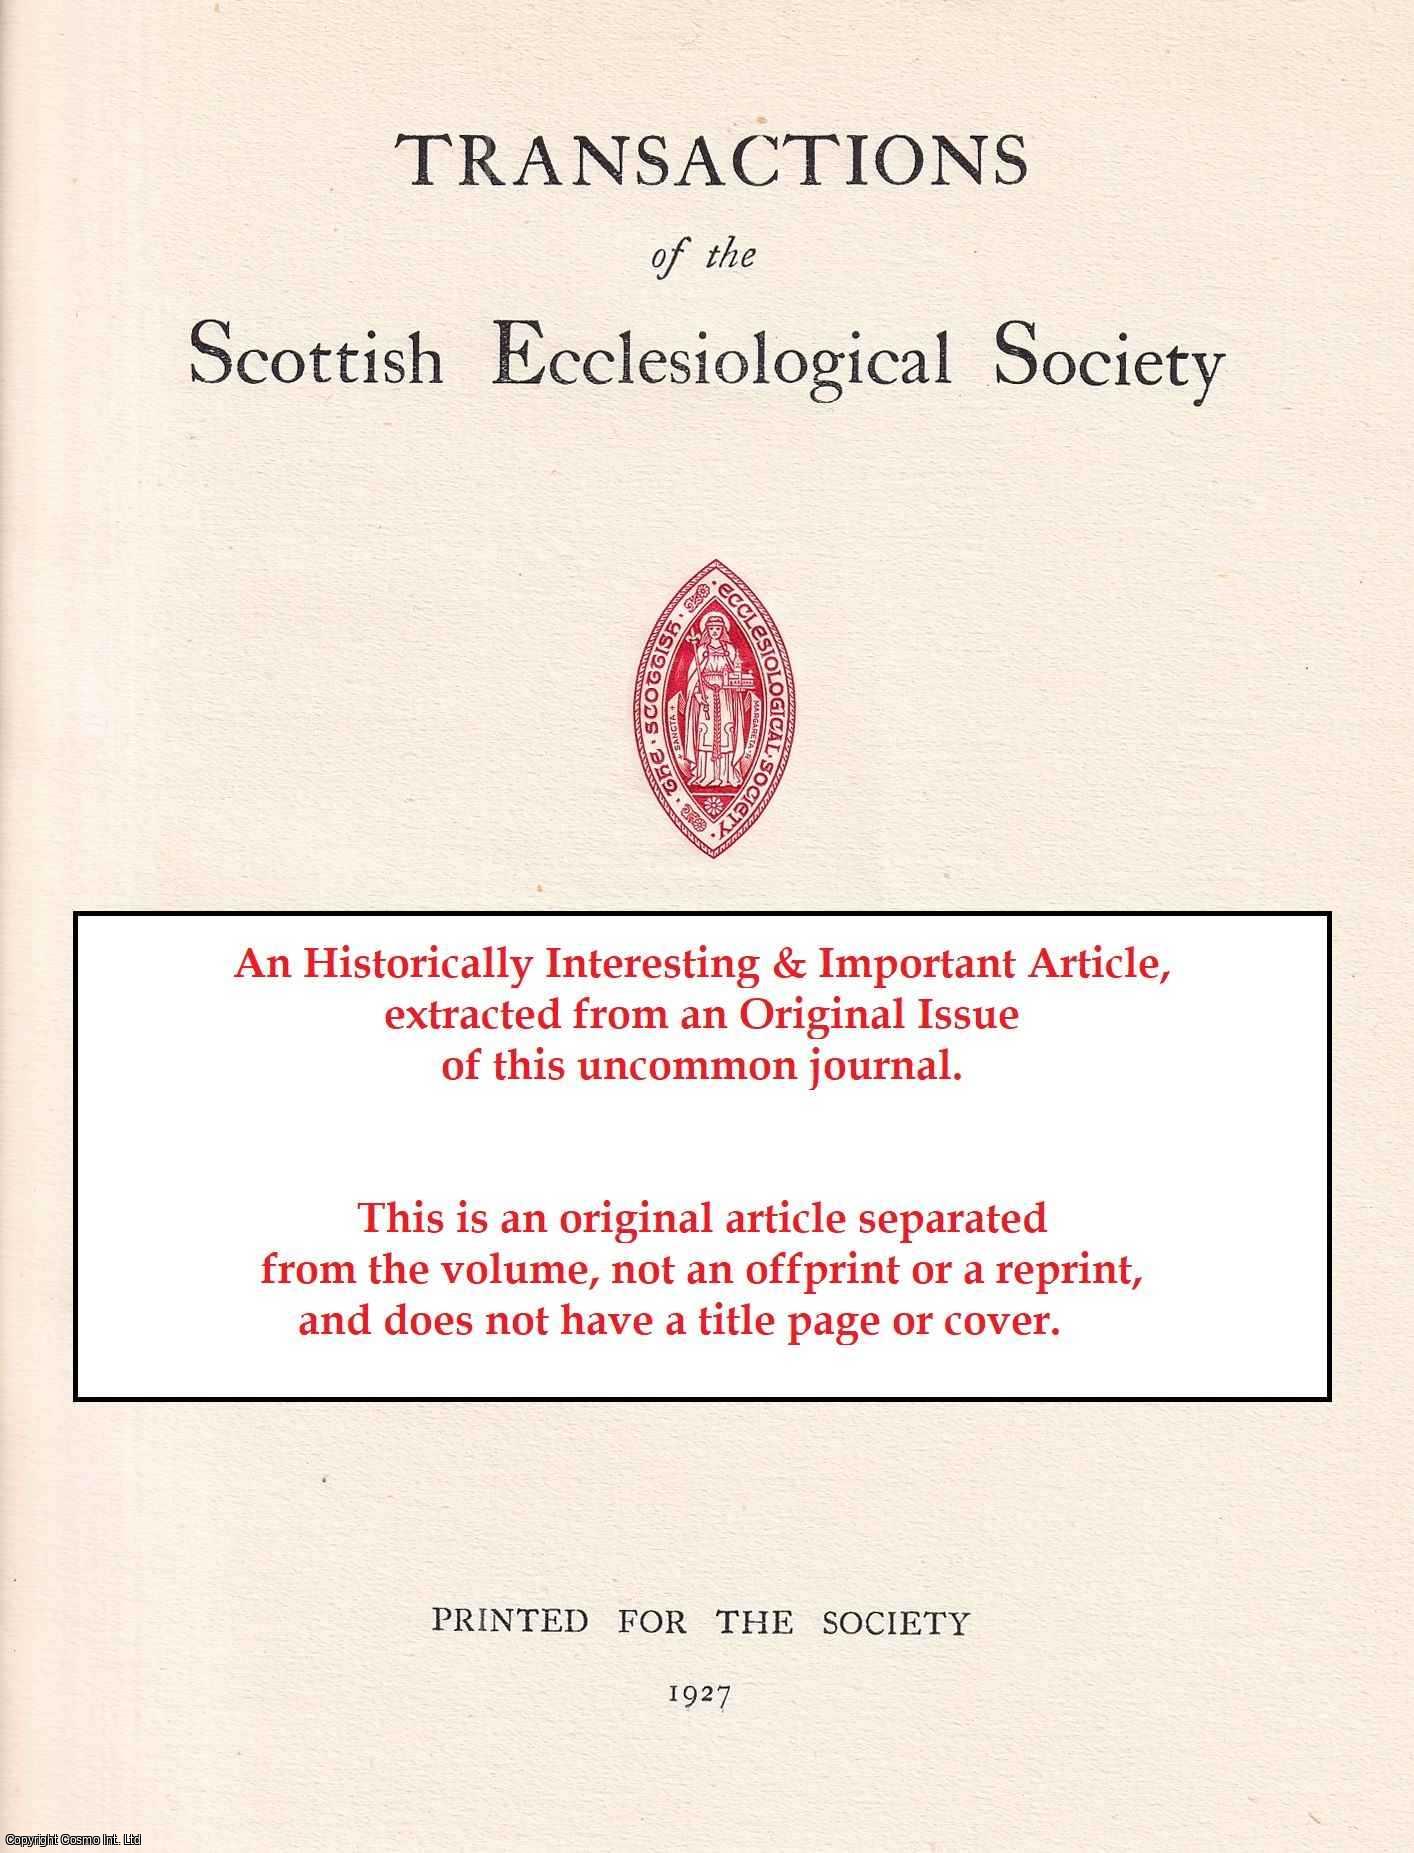 Rev James Fleming Leishman - The Church Offering in Scotland. An original article from the Transactions of the Scottish Ecclesiological Society, 1930.